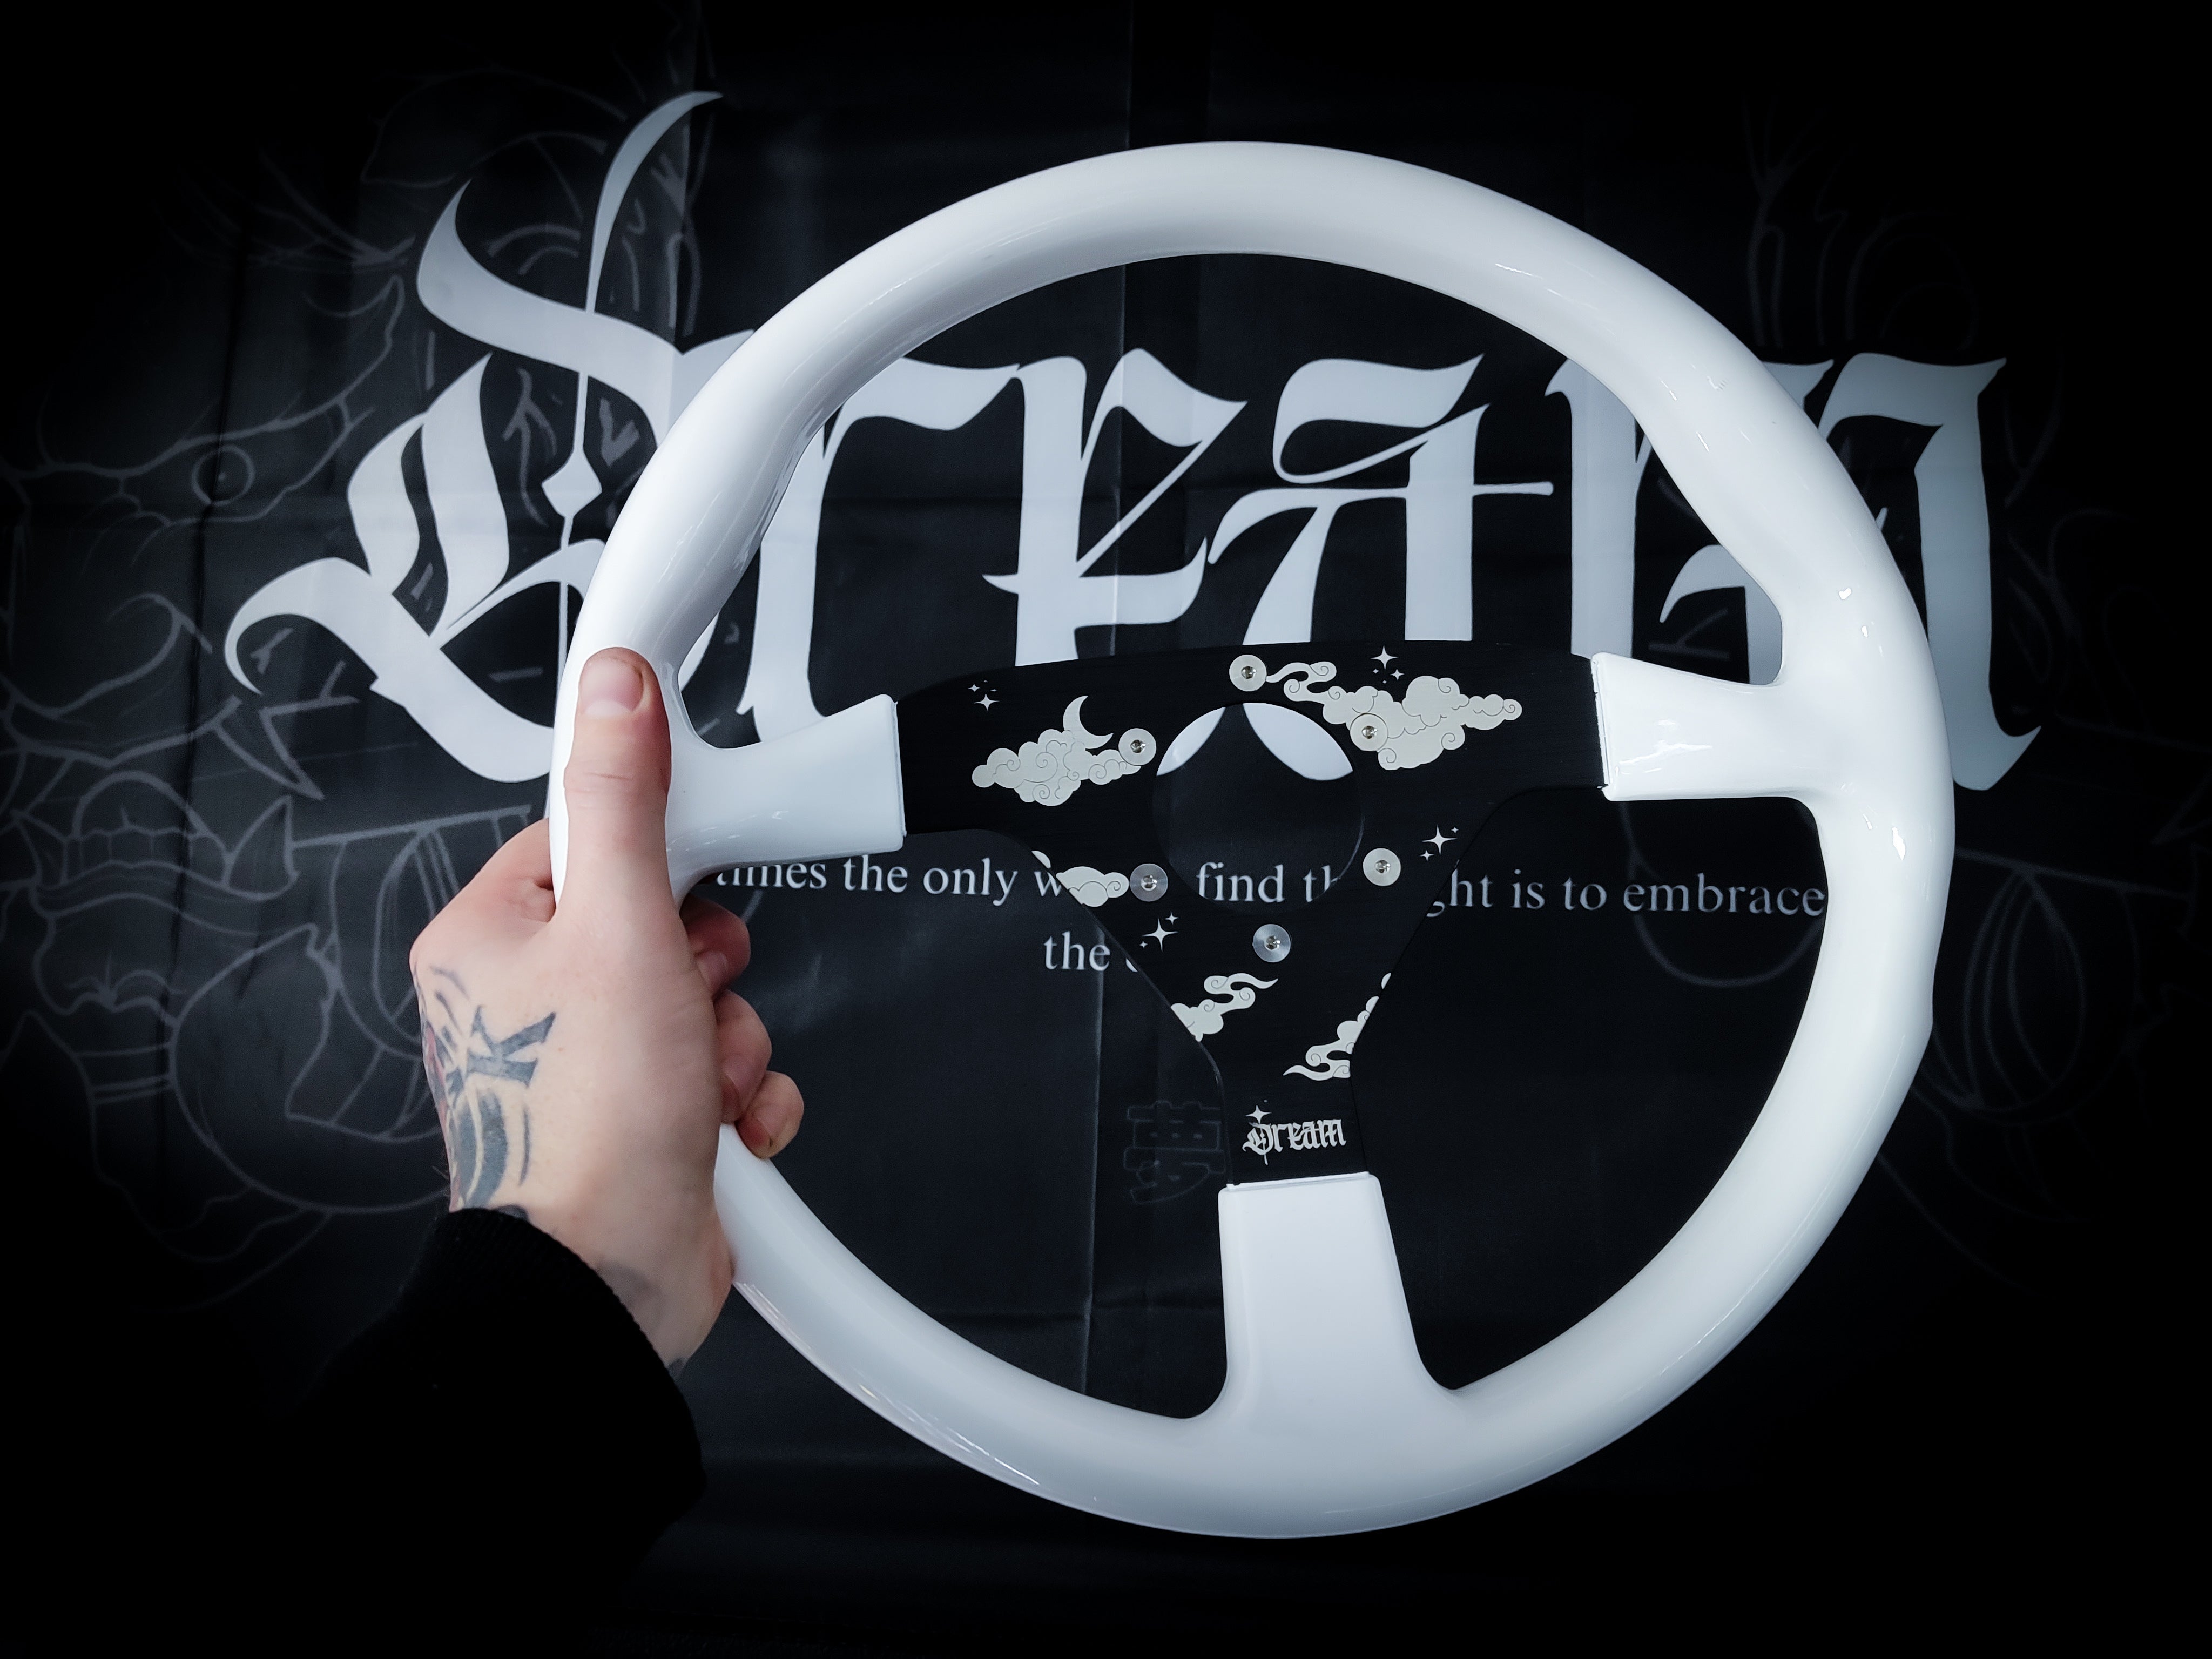 LIMITED Polar White "Dream" Etched Flat Face Steering Wheel